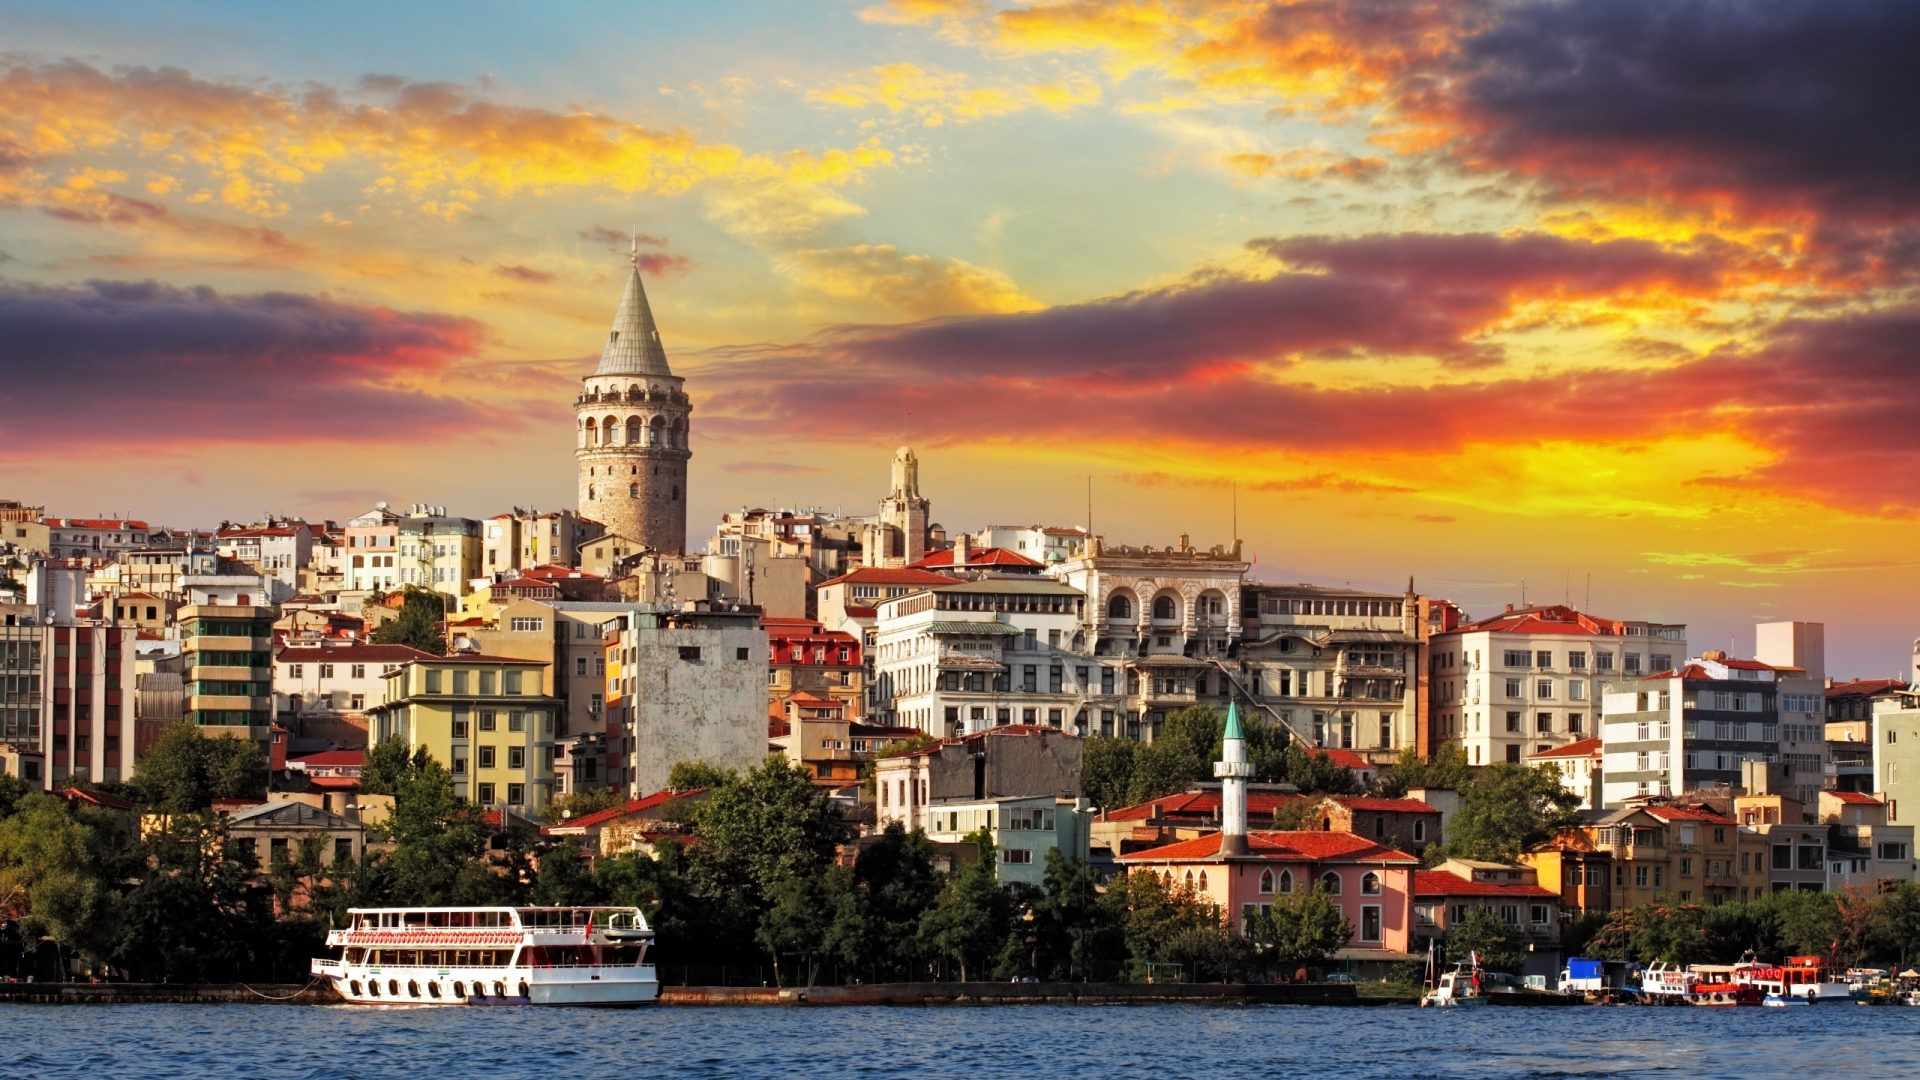 Sunset in Istambul for 1920 x 1080 HDTV 1080p resolution